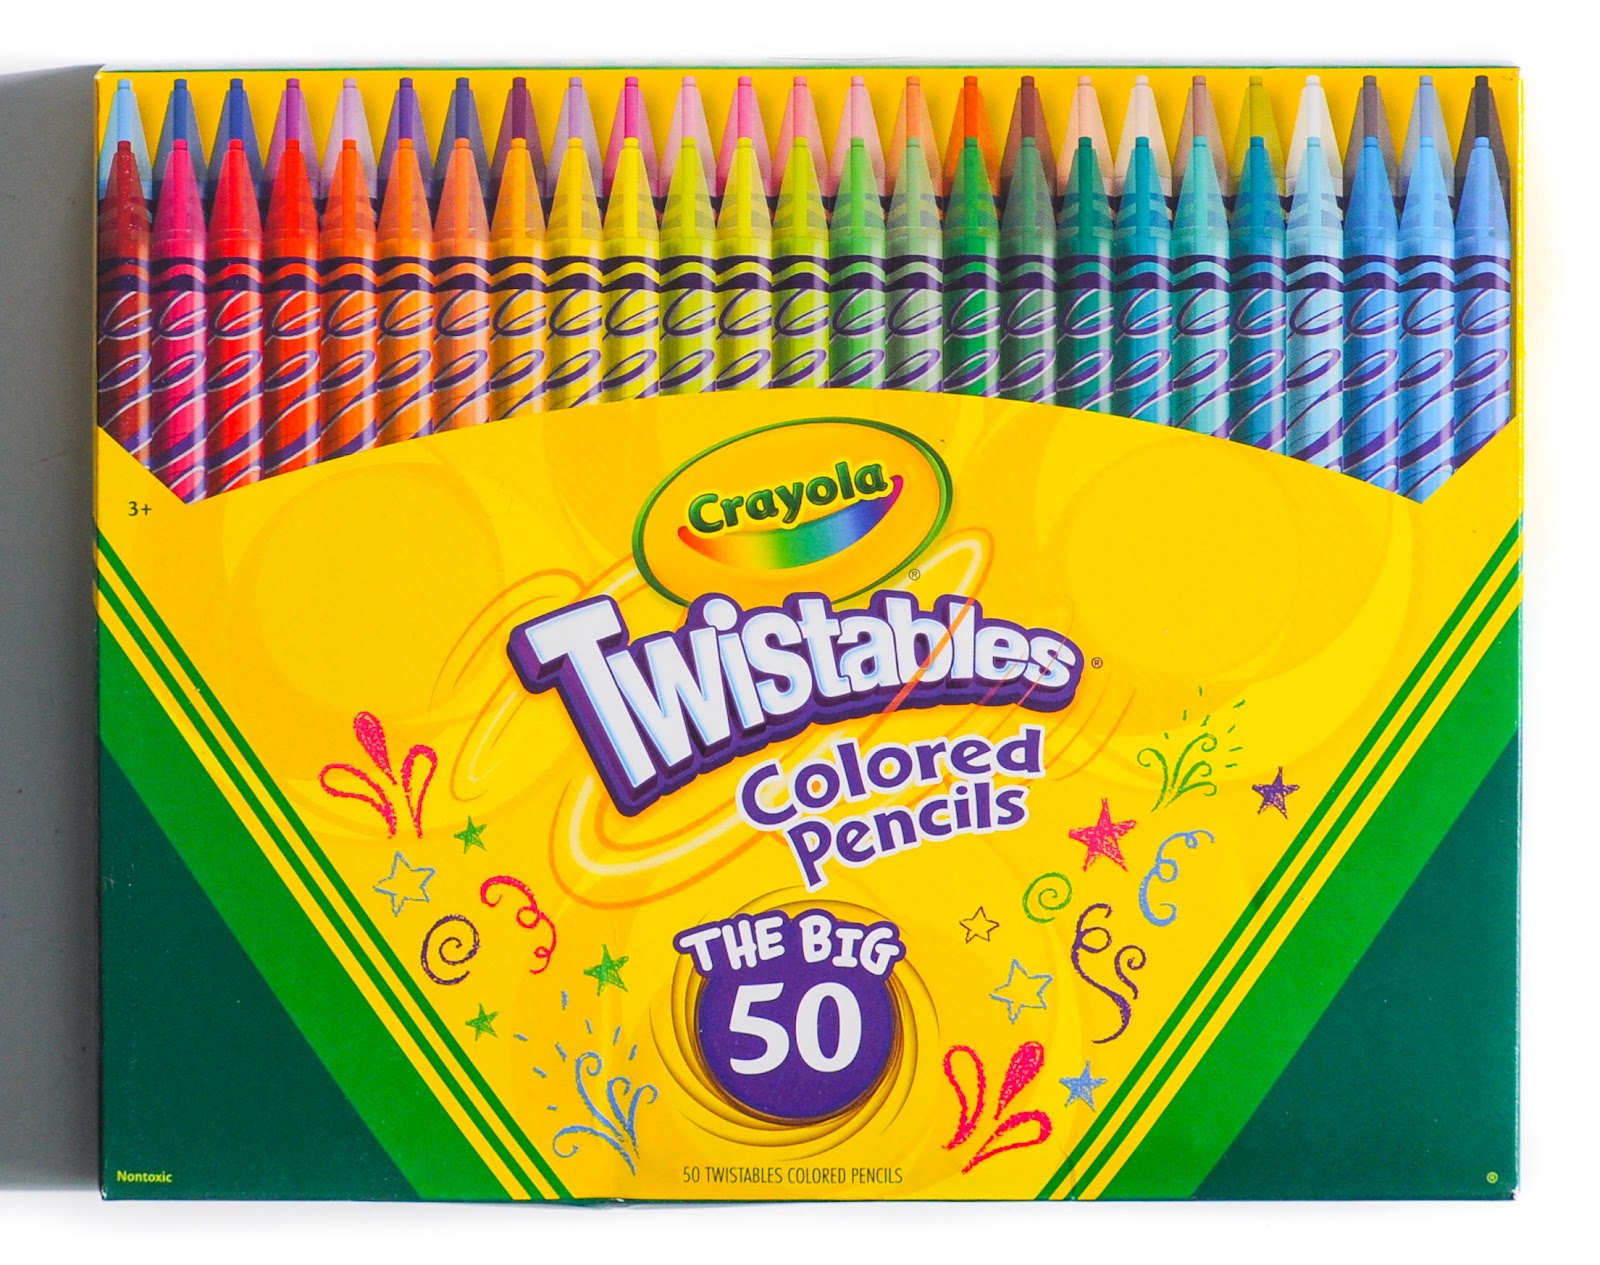 50-Pack of Crayola Colored Pencils